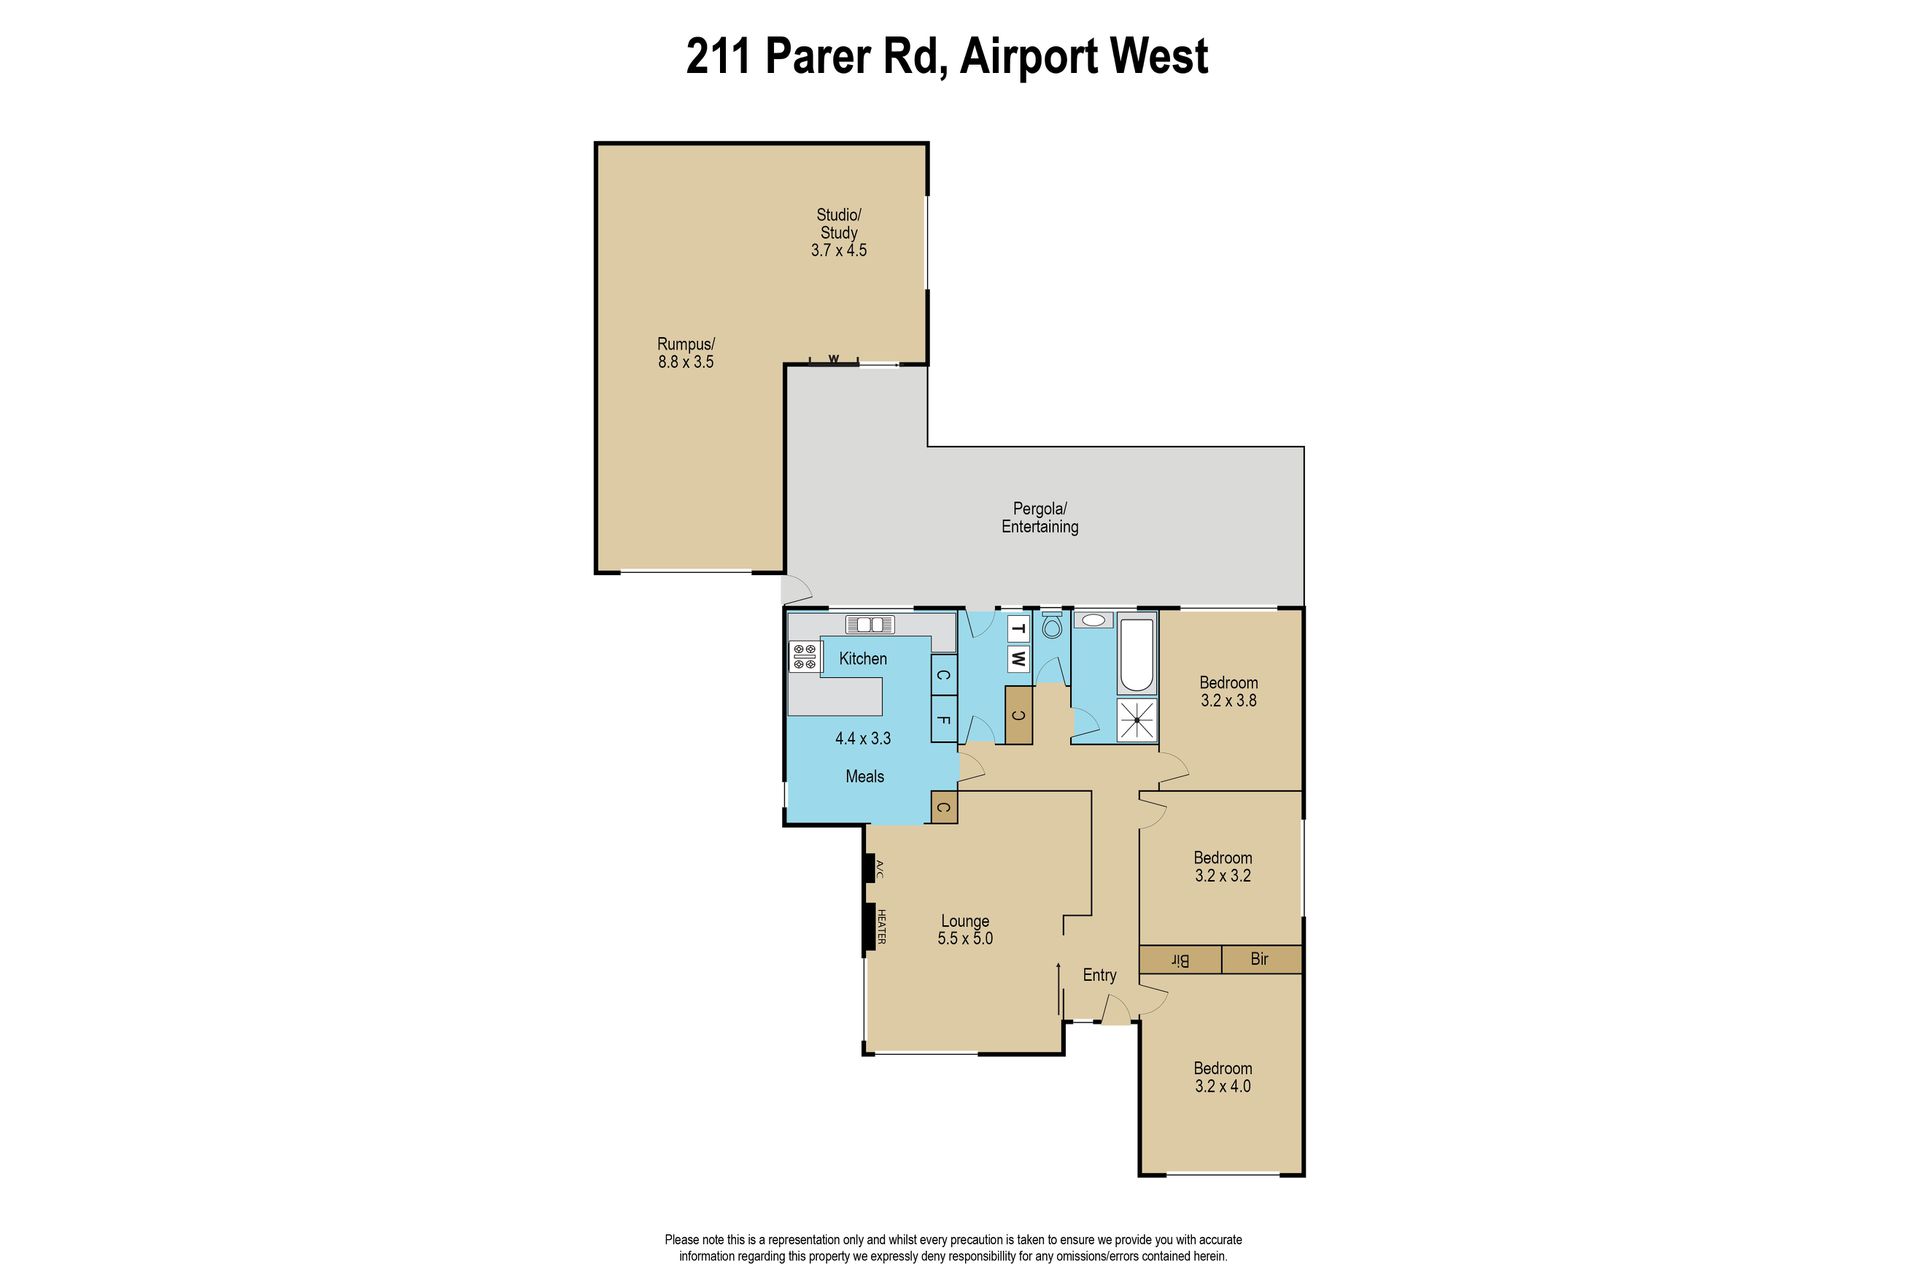 211 Parer Road, Airport West